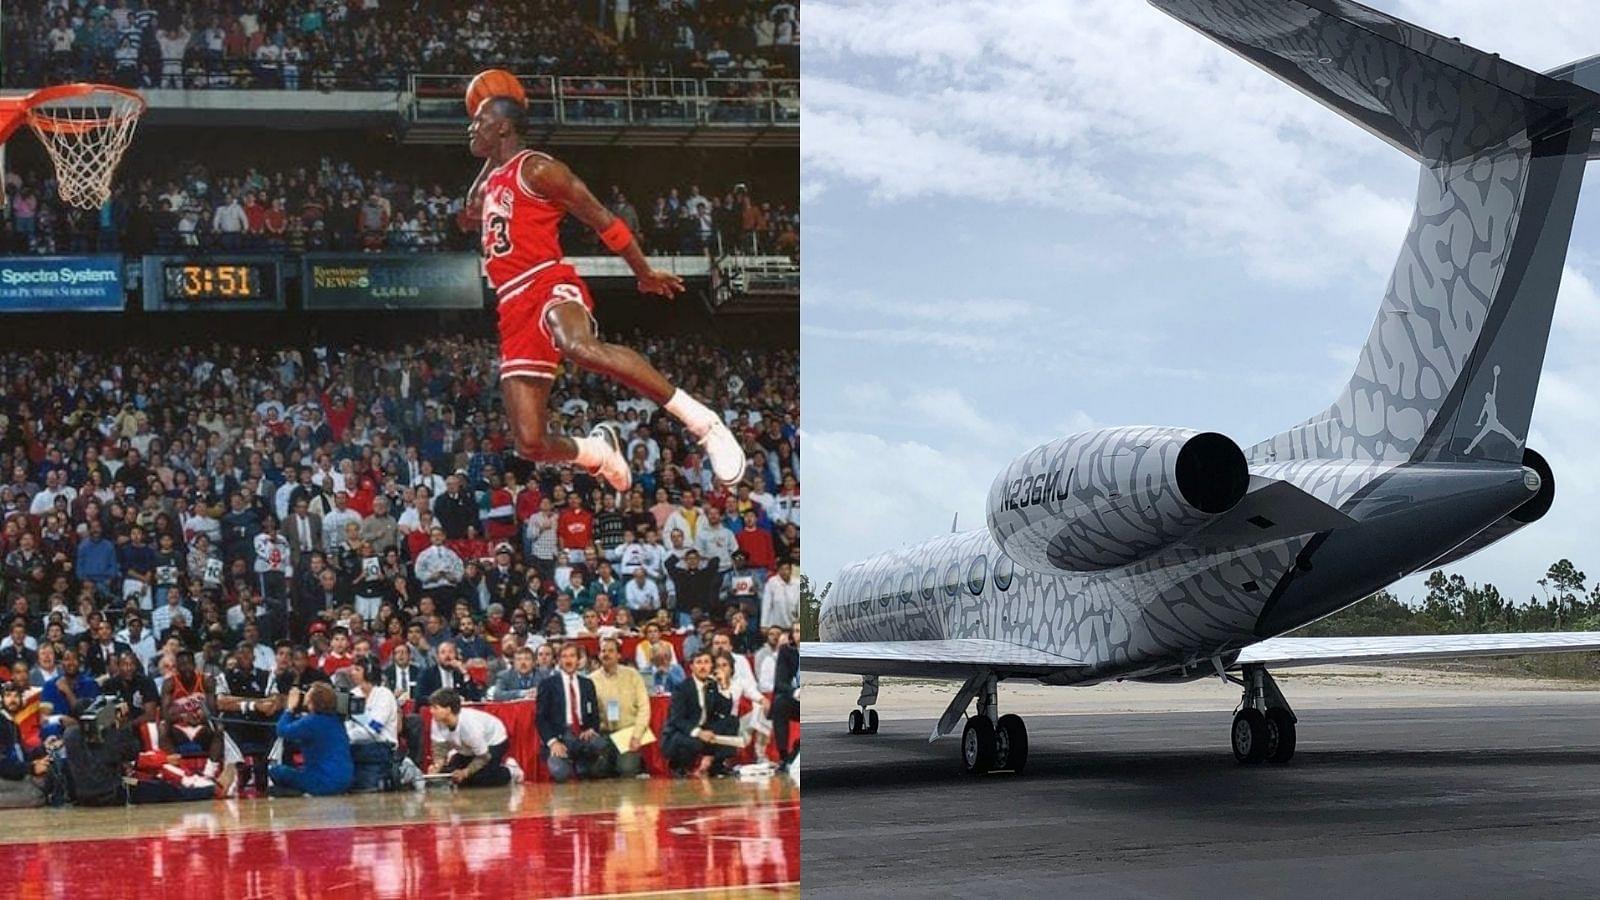 “Michael Jordan flew in a $61 million Air Jordan 3 themed jet for a Fishing tournament!?”: When ‘His Airness' arrived in style with his Rolls Royce-powered private plane